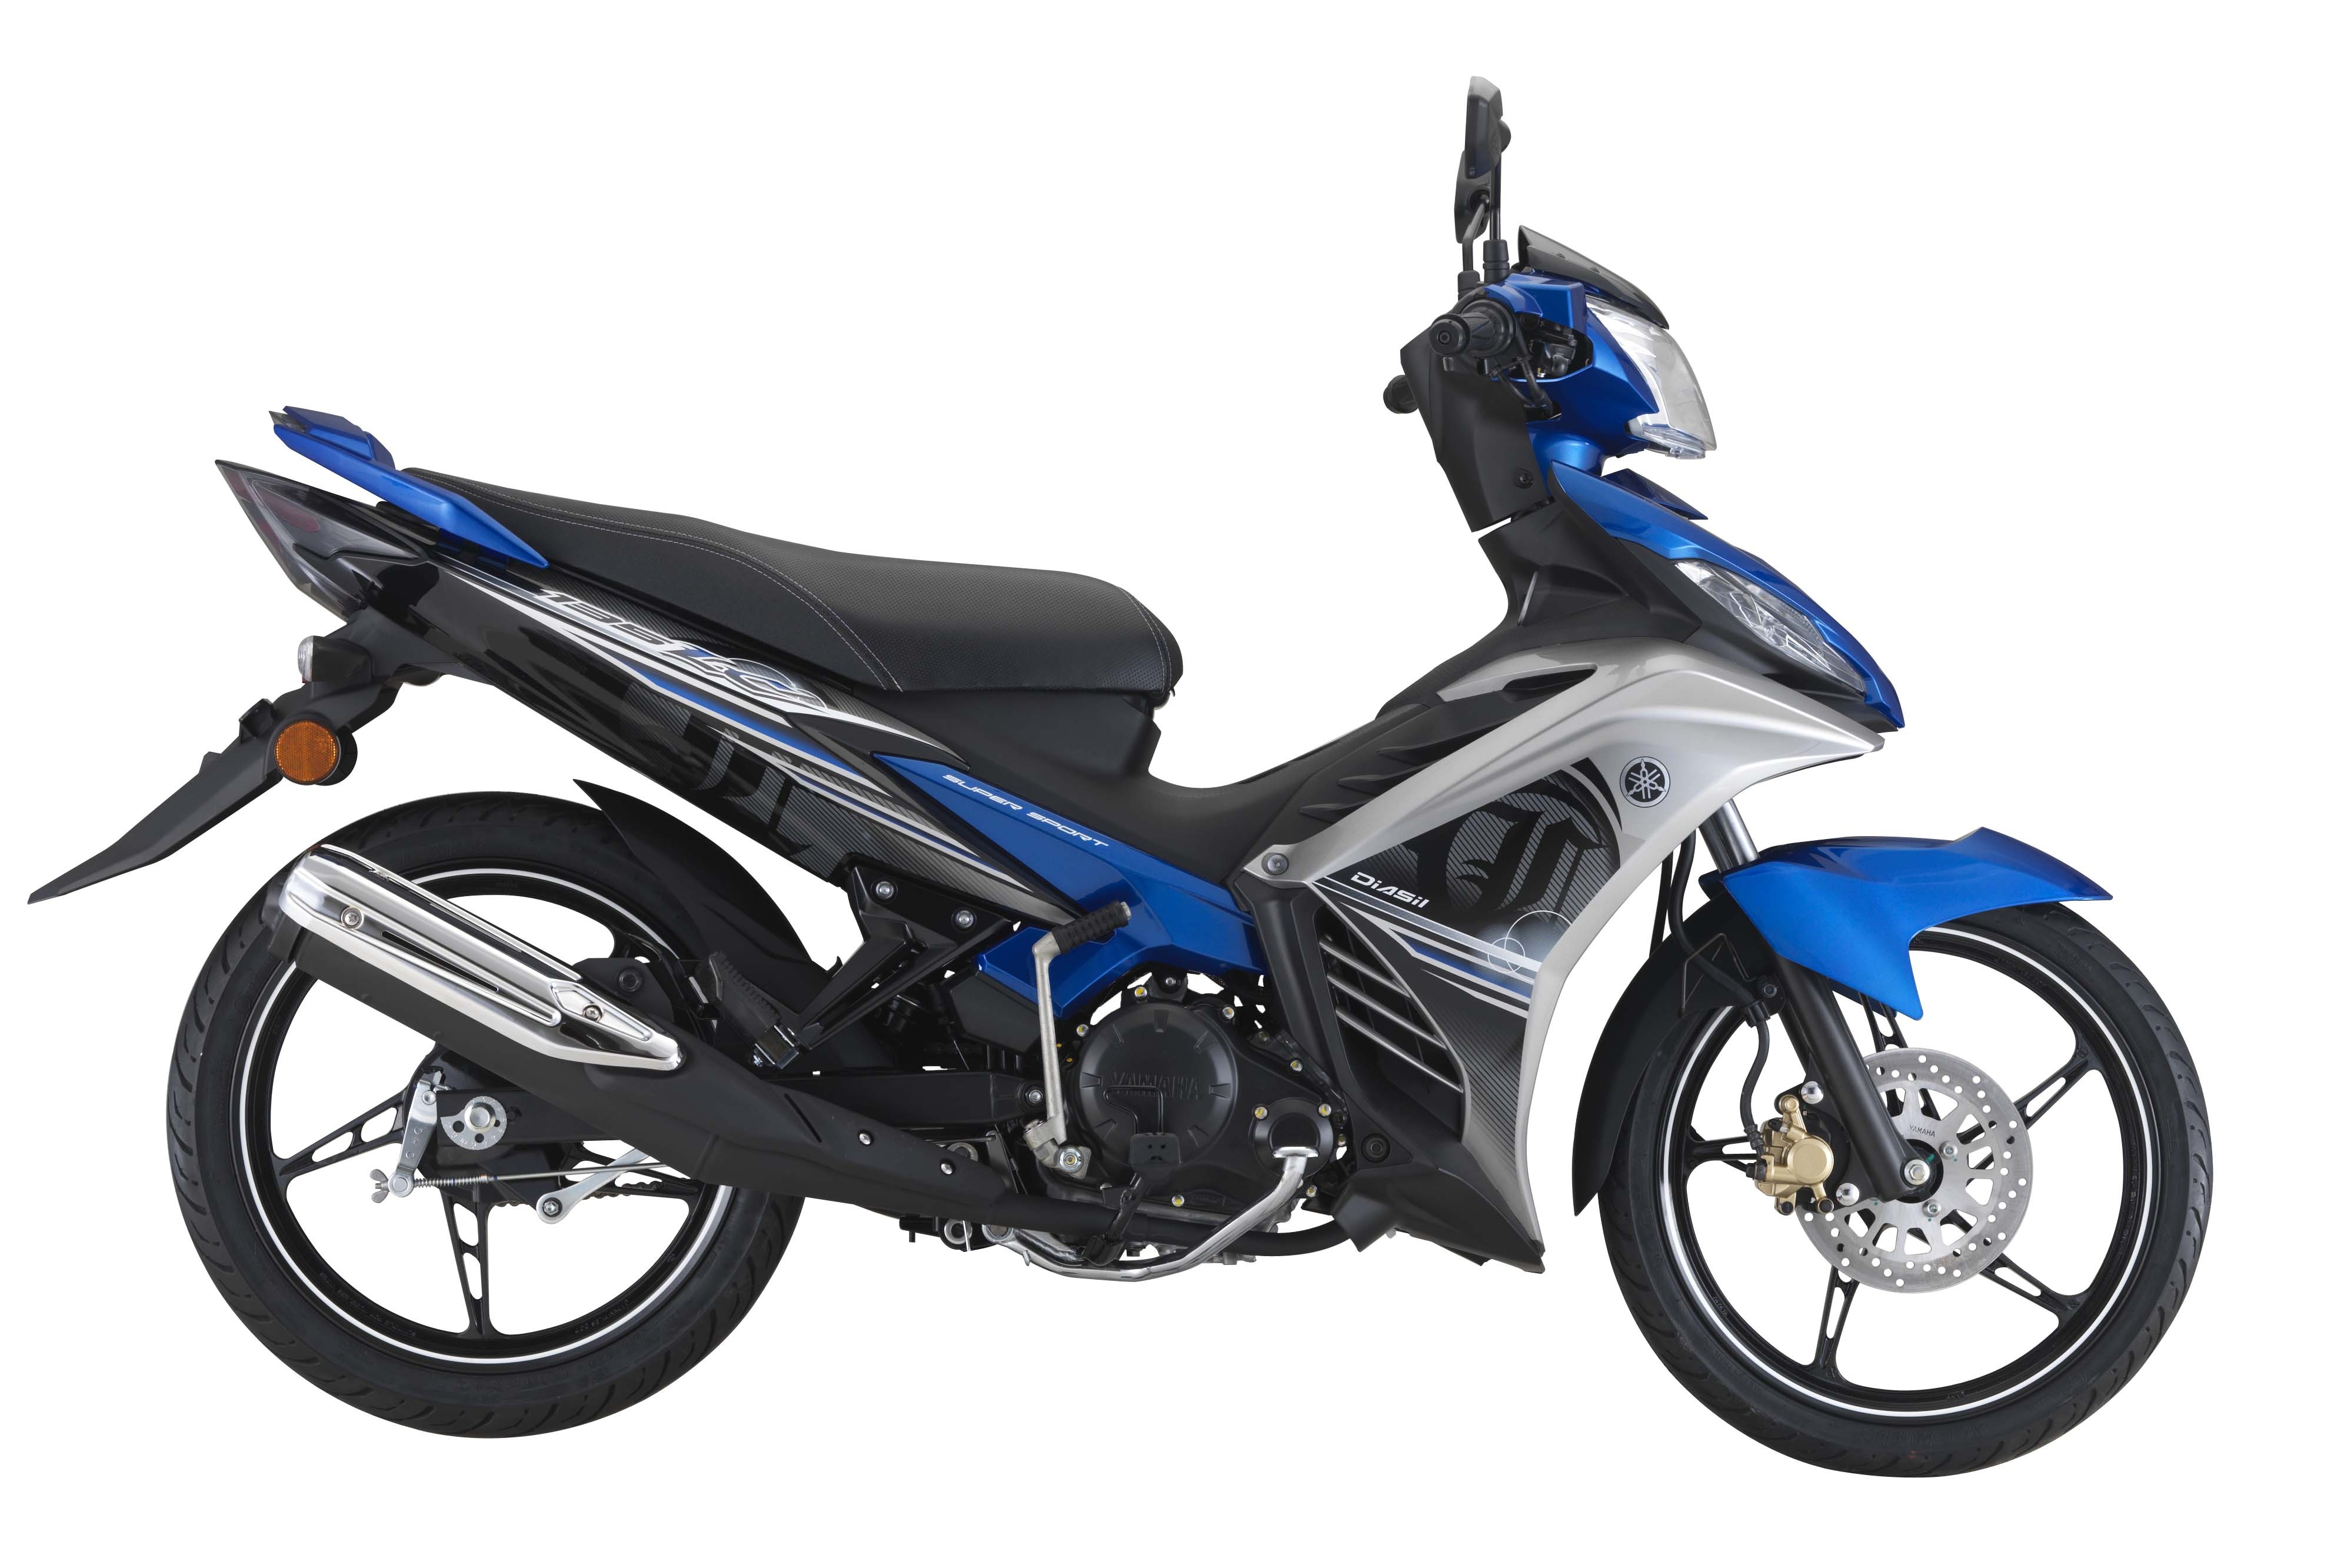 2016 Yamaha 135LC price confirmed, up to RM7,068 Image 439165